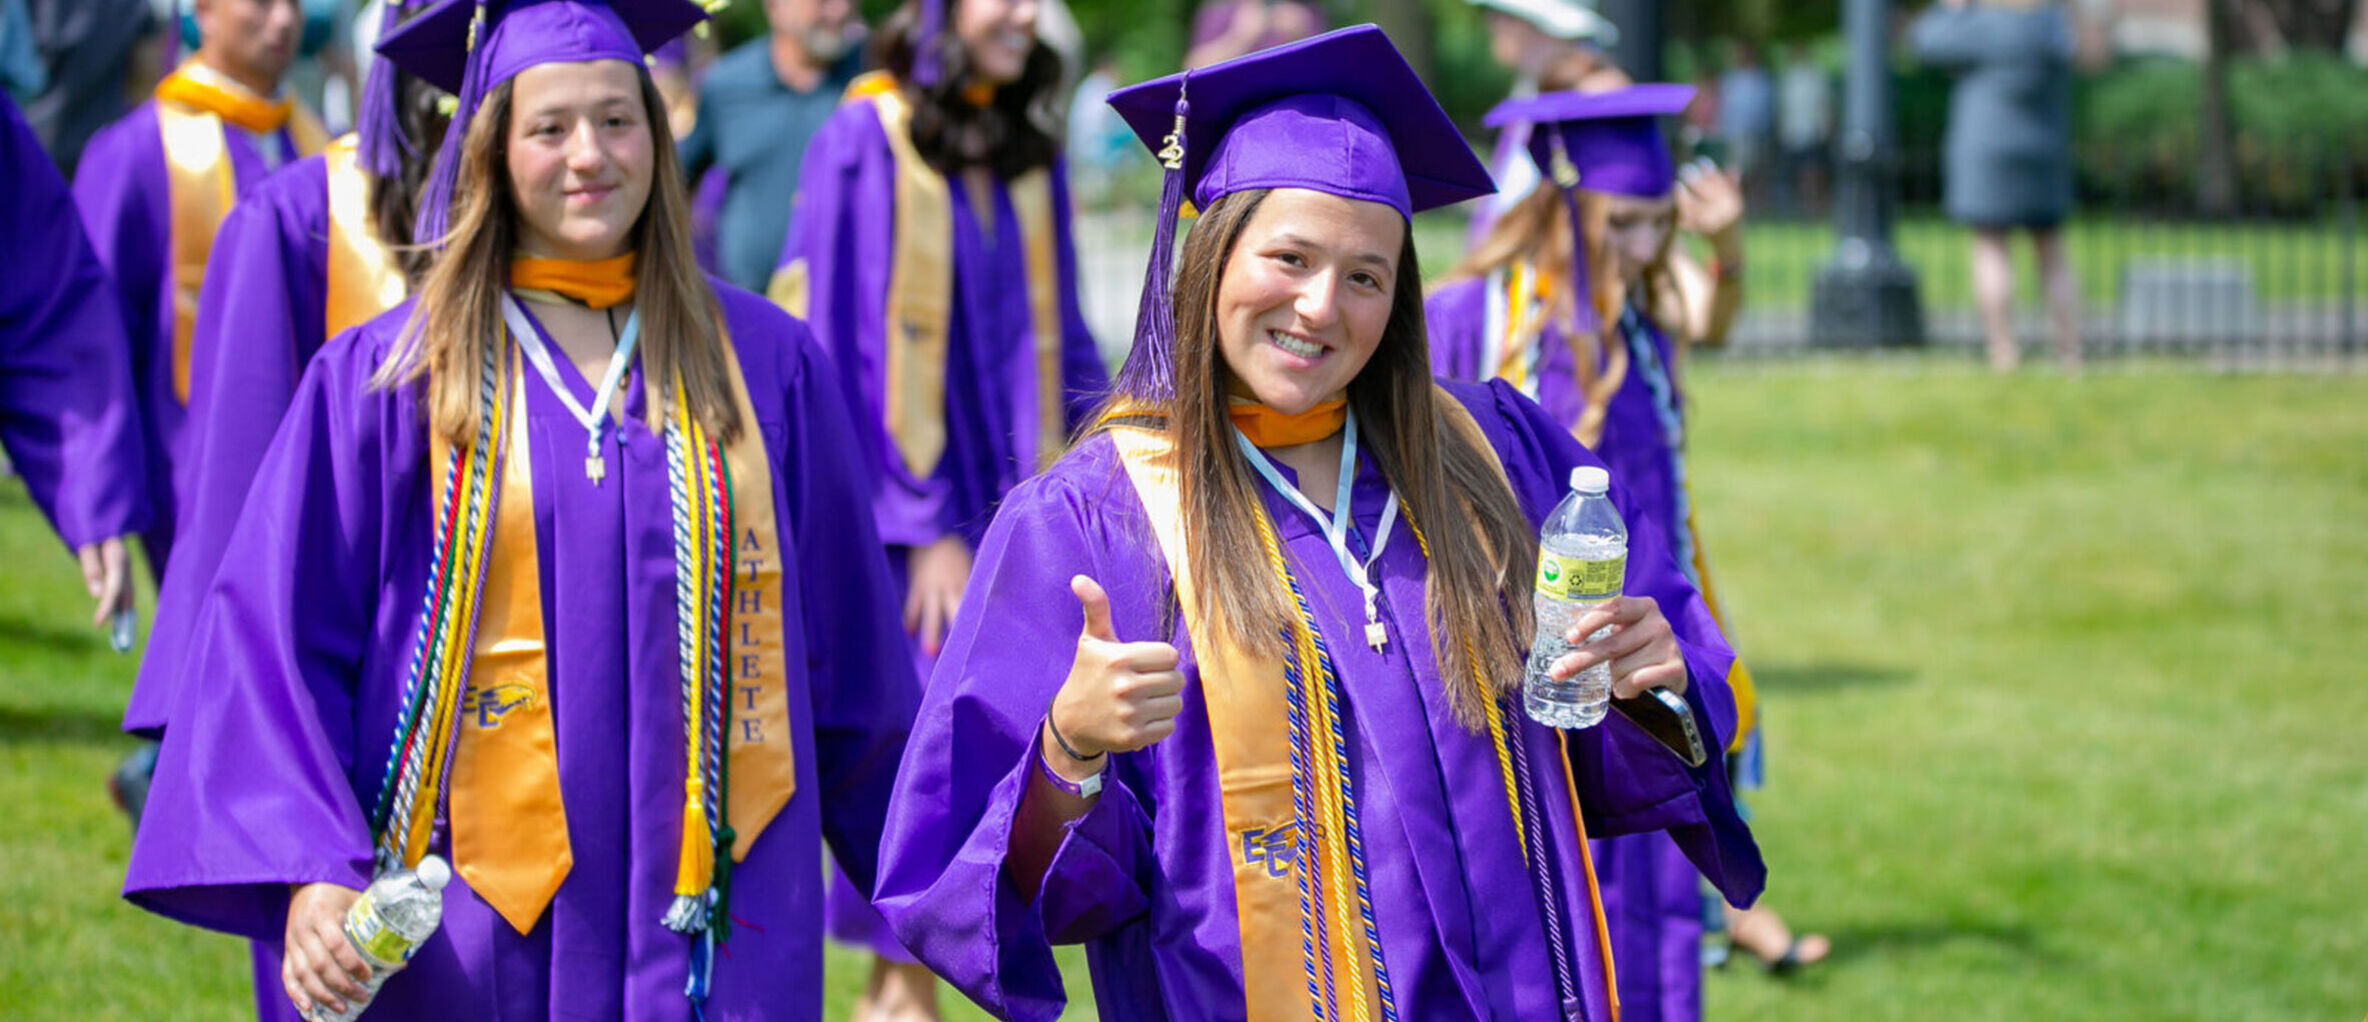 A student gives a thumbs up during commencement